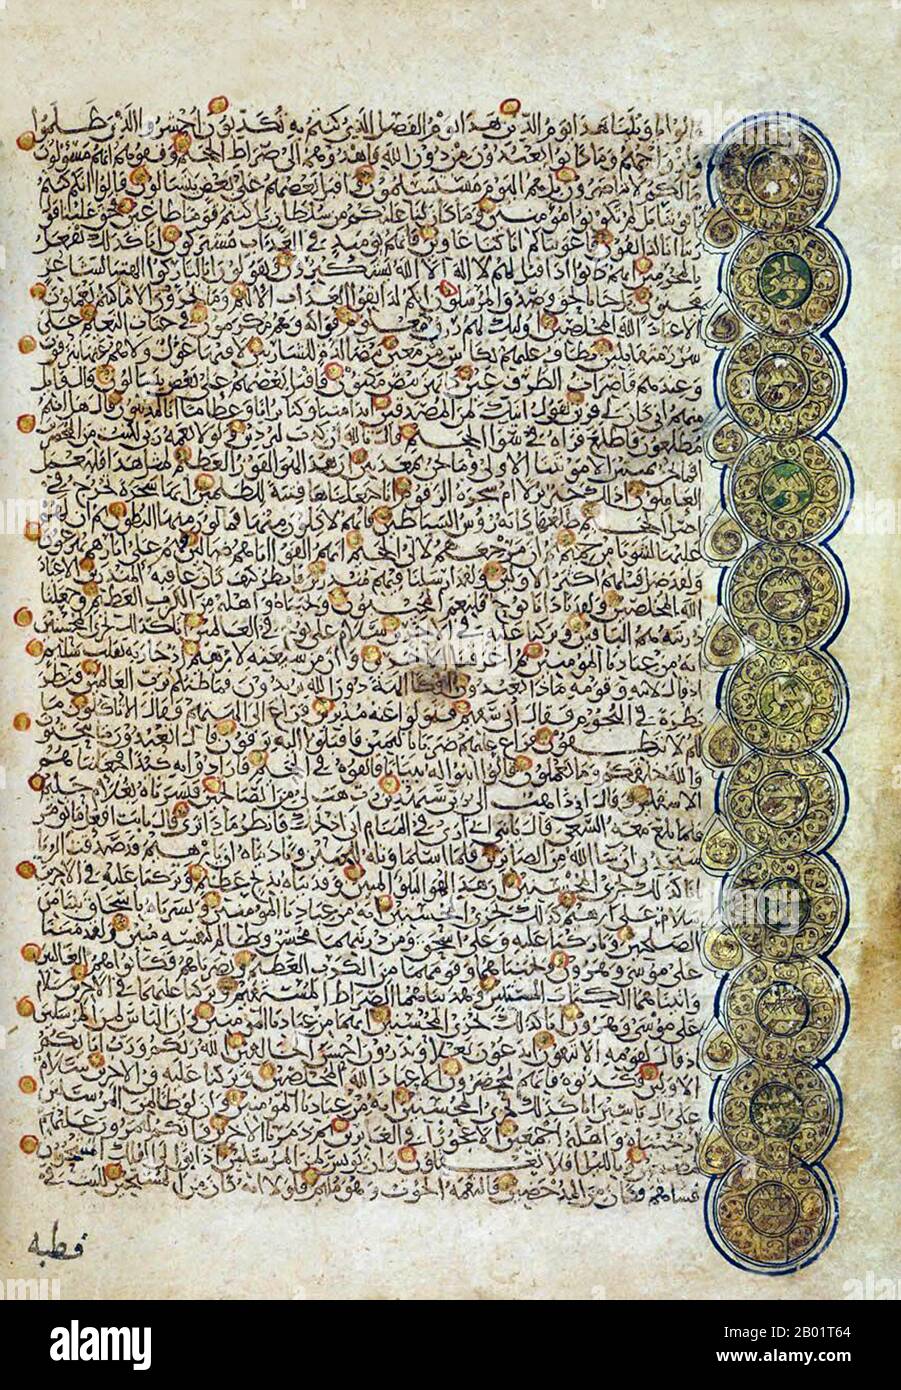 Iraq/Iran/Persia: Illuminated page from a Qur'an with sura al-Saaffat, c. 1036.  Surat As-Saaffat (Those Who Set The Ranks, Drawn Up In Ranks) is the 37th sura of the Qur'an with 182 ayat. Stock Photo